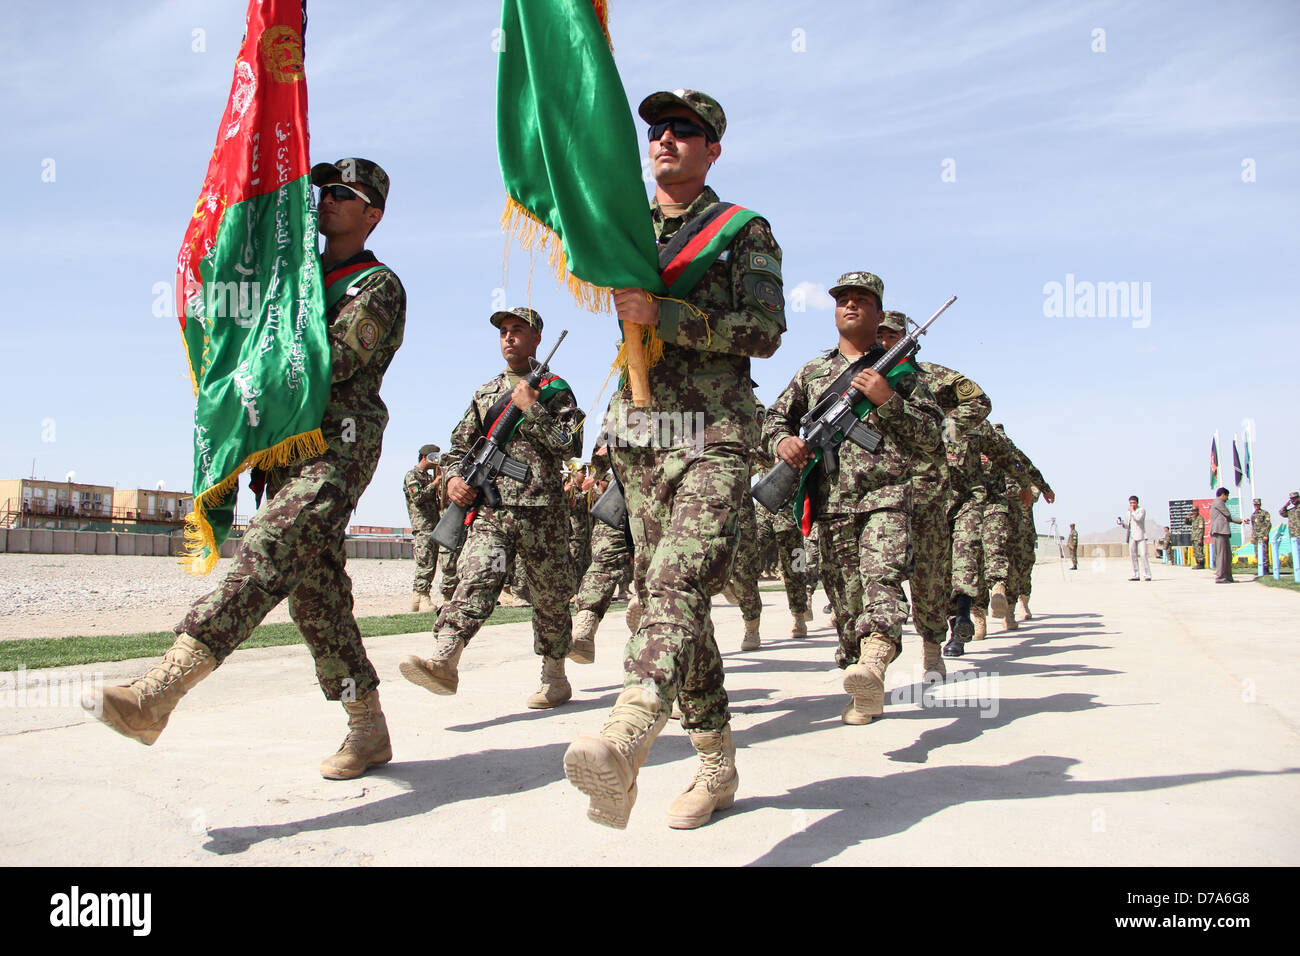 More than 1,000 ANA(Afghan national army) soldiers graduate from training for six months in Herat province. Stock Photo